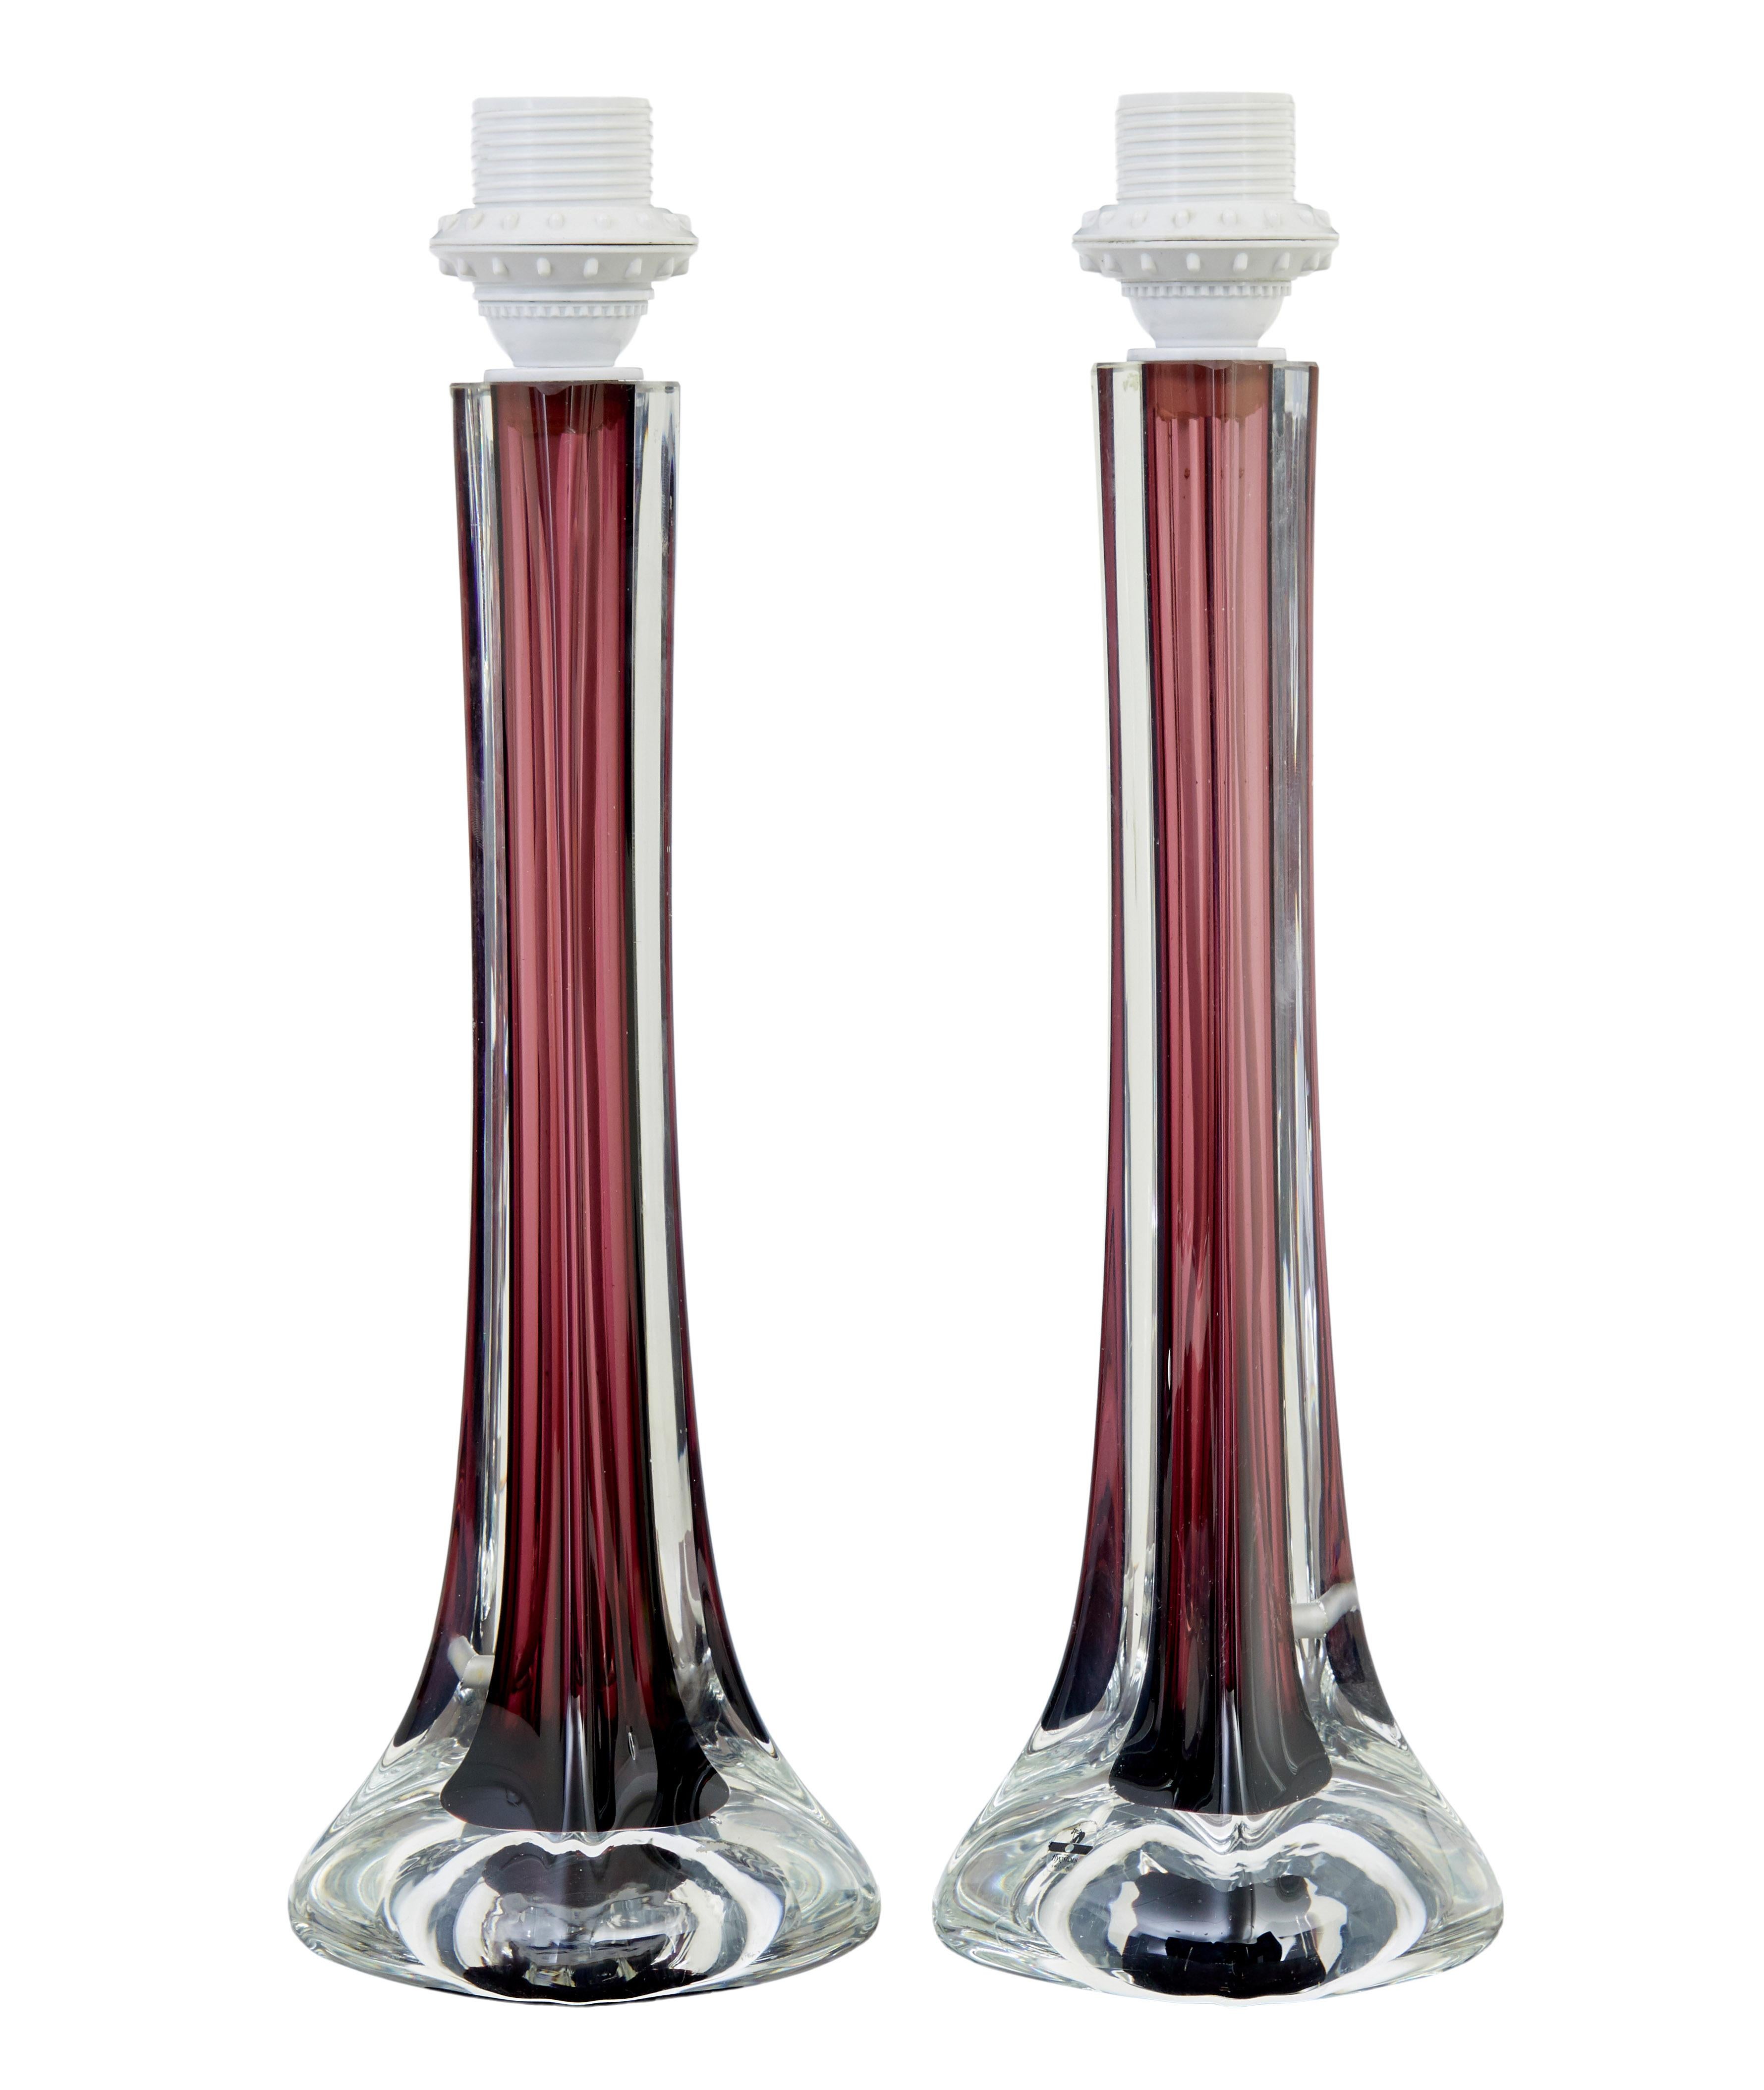 Pair of mid 20th century coloured glass table lamps by Flygsfors of Sweden circa 1960.

Well known model designed by Paul Kedelv, coquille shaped with a burgundy coloured inner stem, flowing down to a bulbous shaped base.

Makers label still